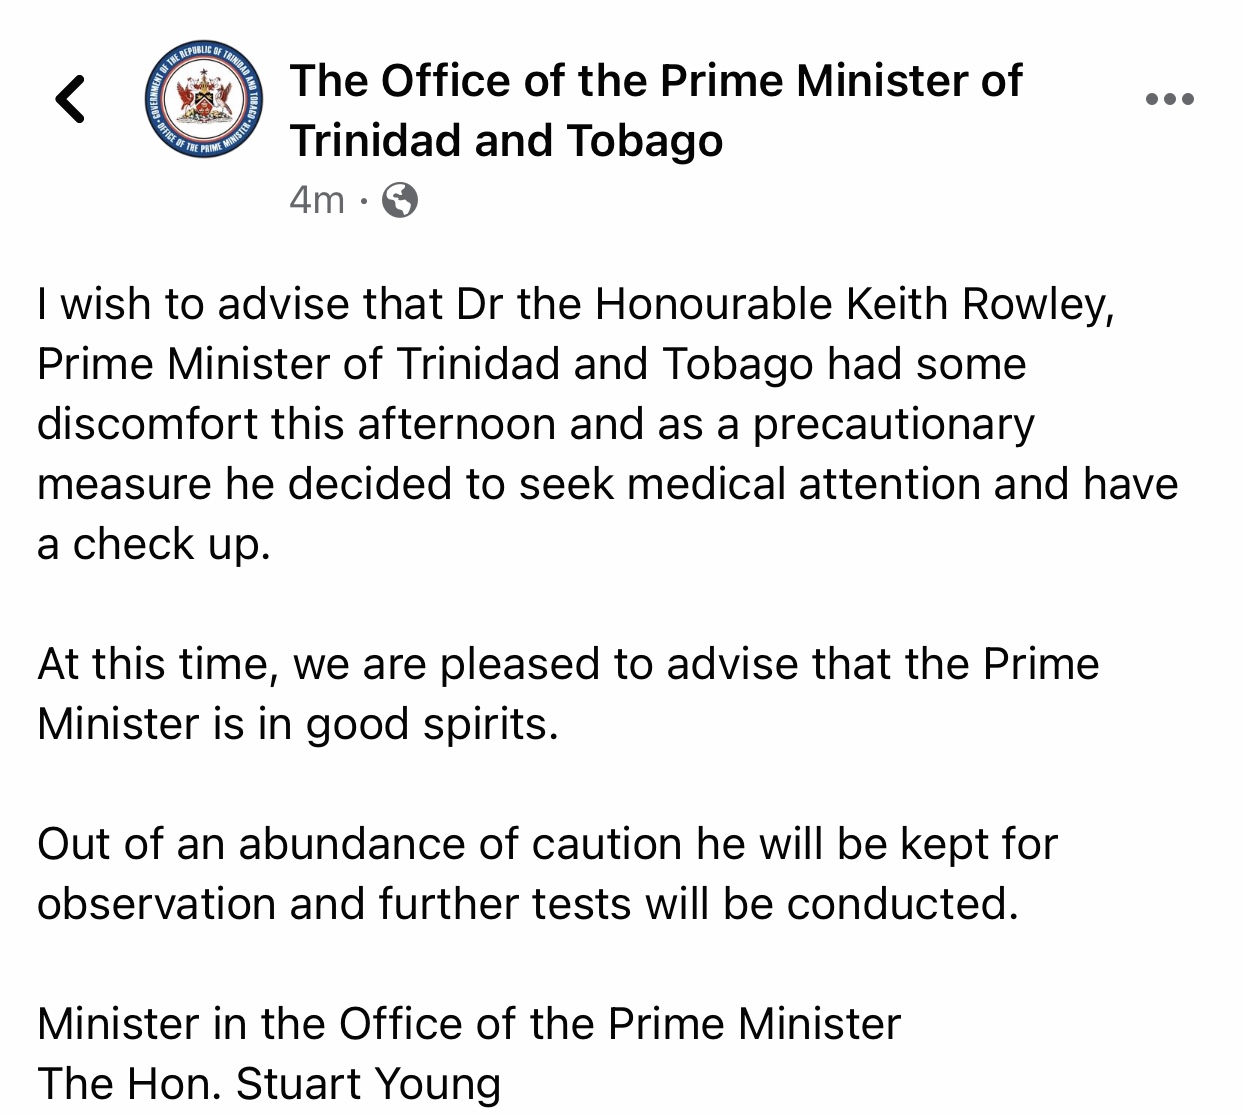 PM Rowley seeks medical attention